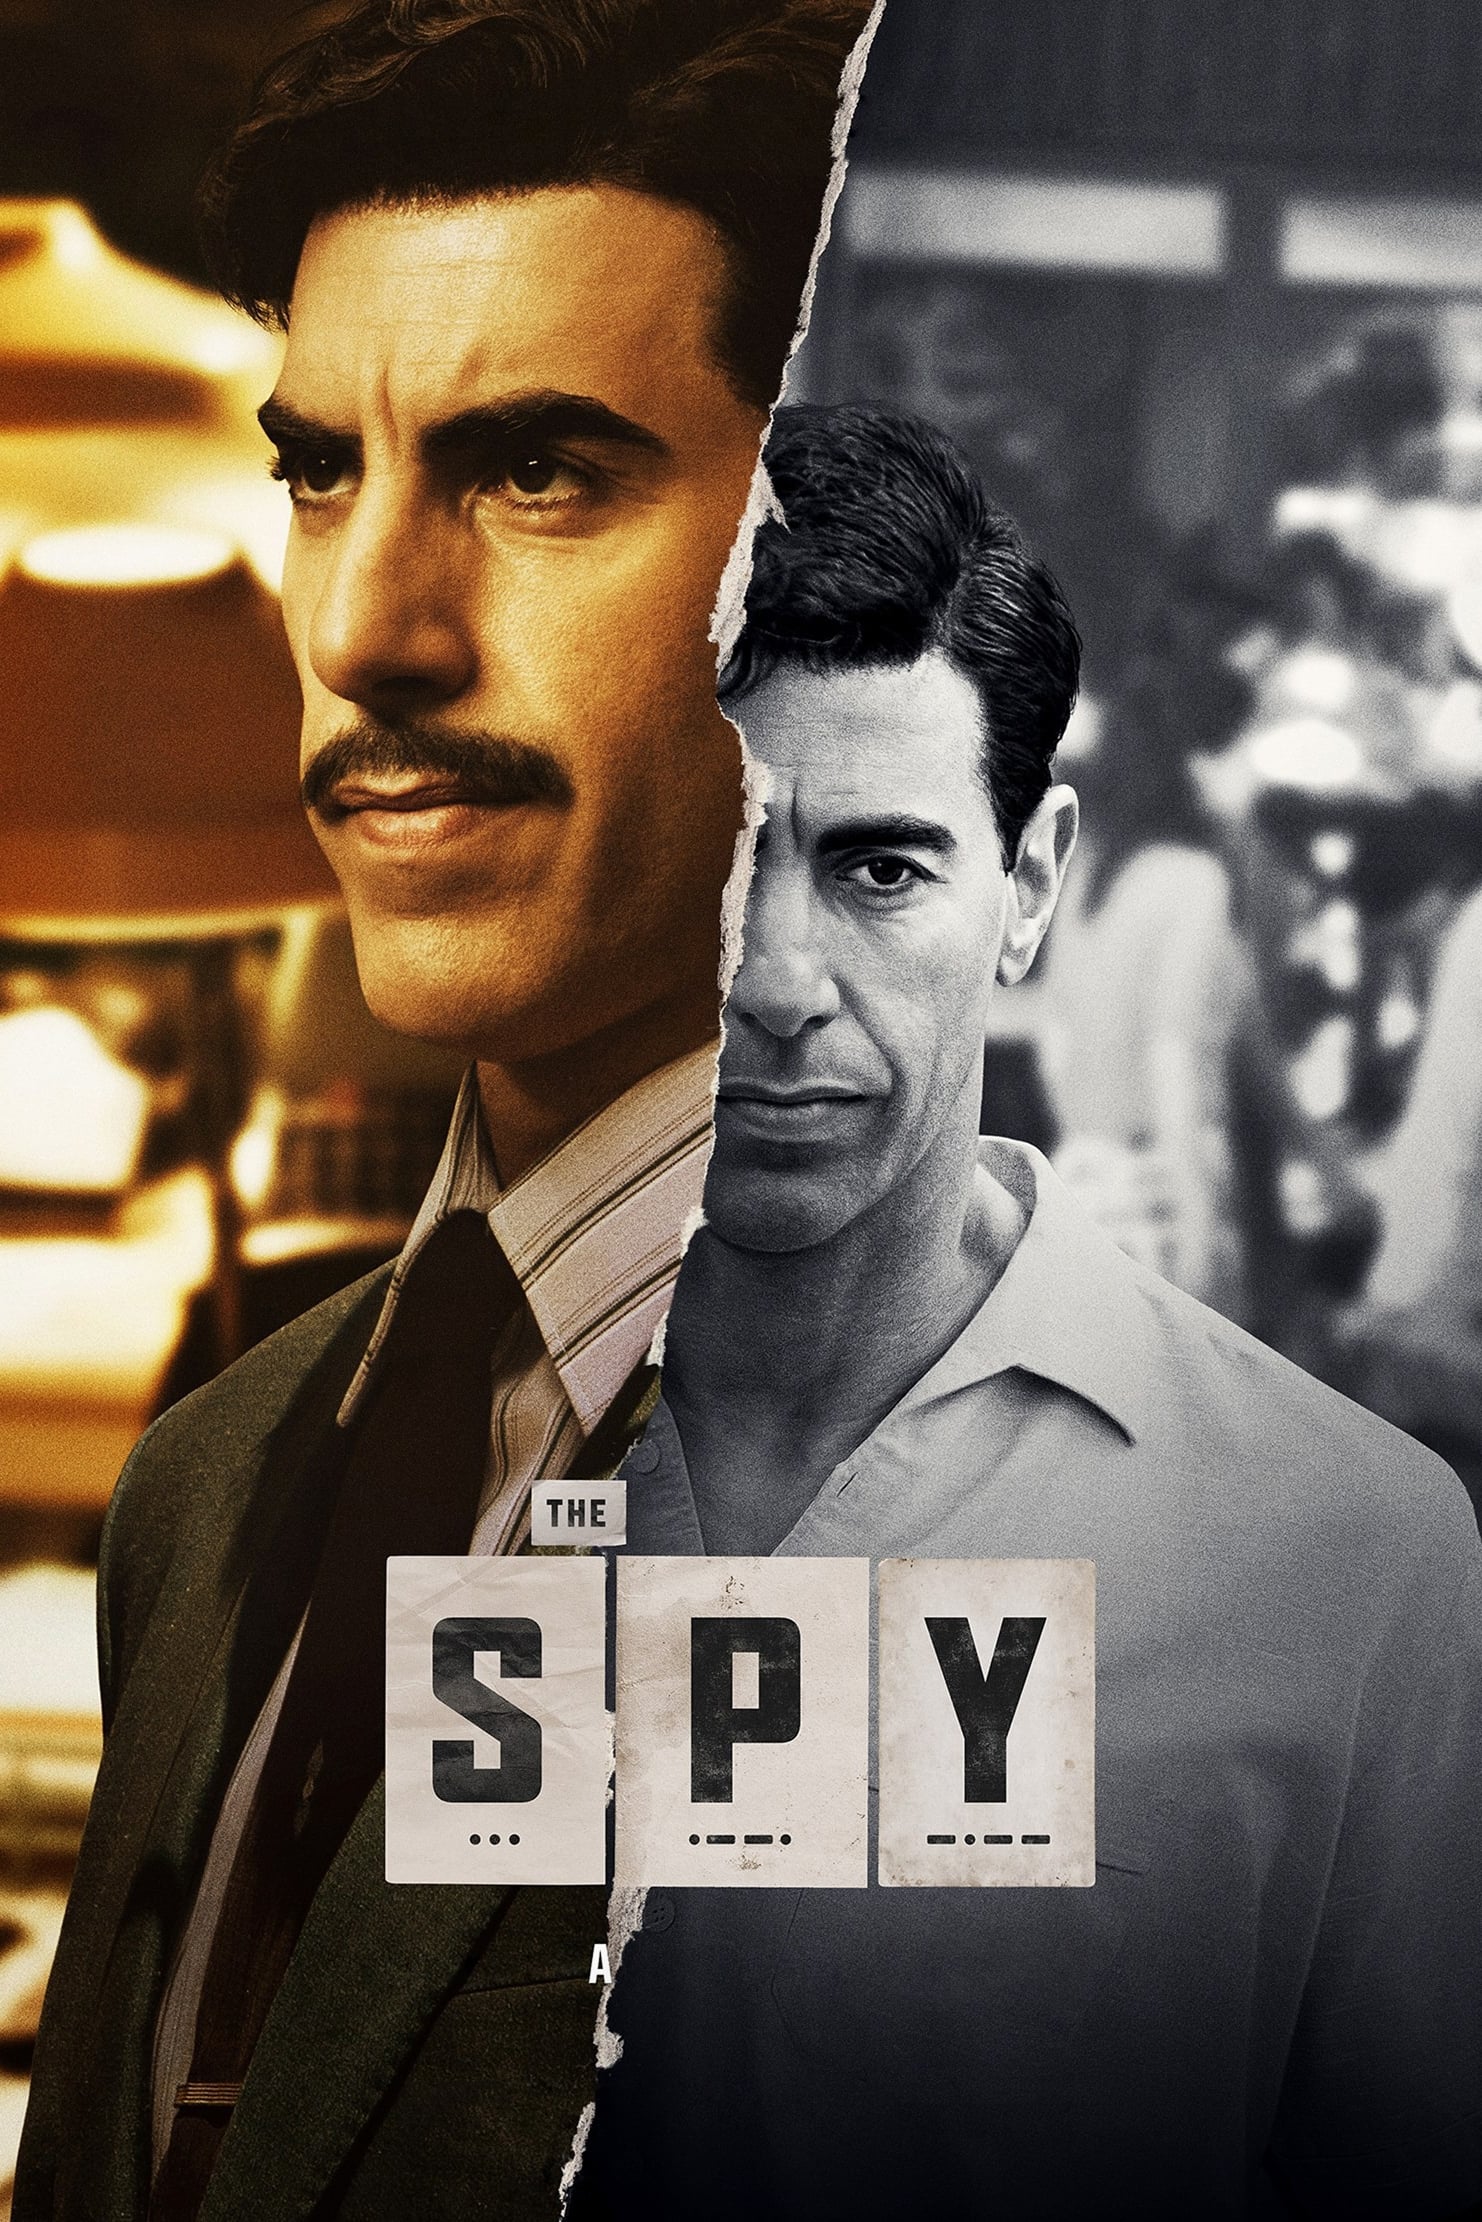 The Spy TV Shows About 1960s